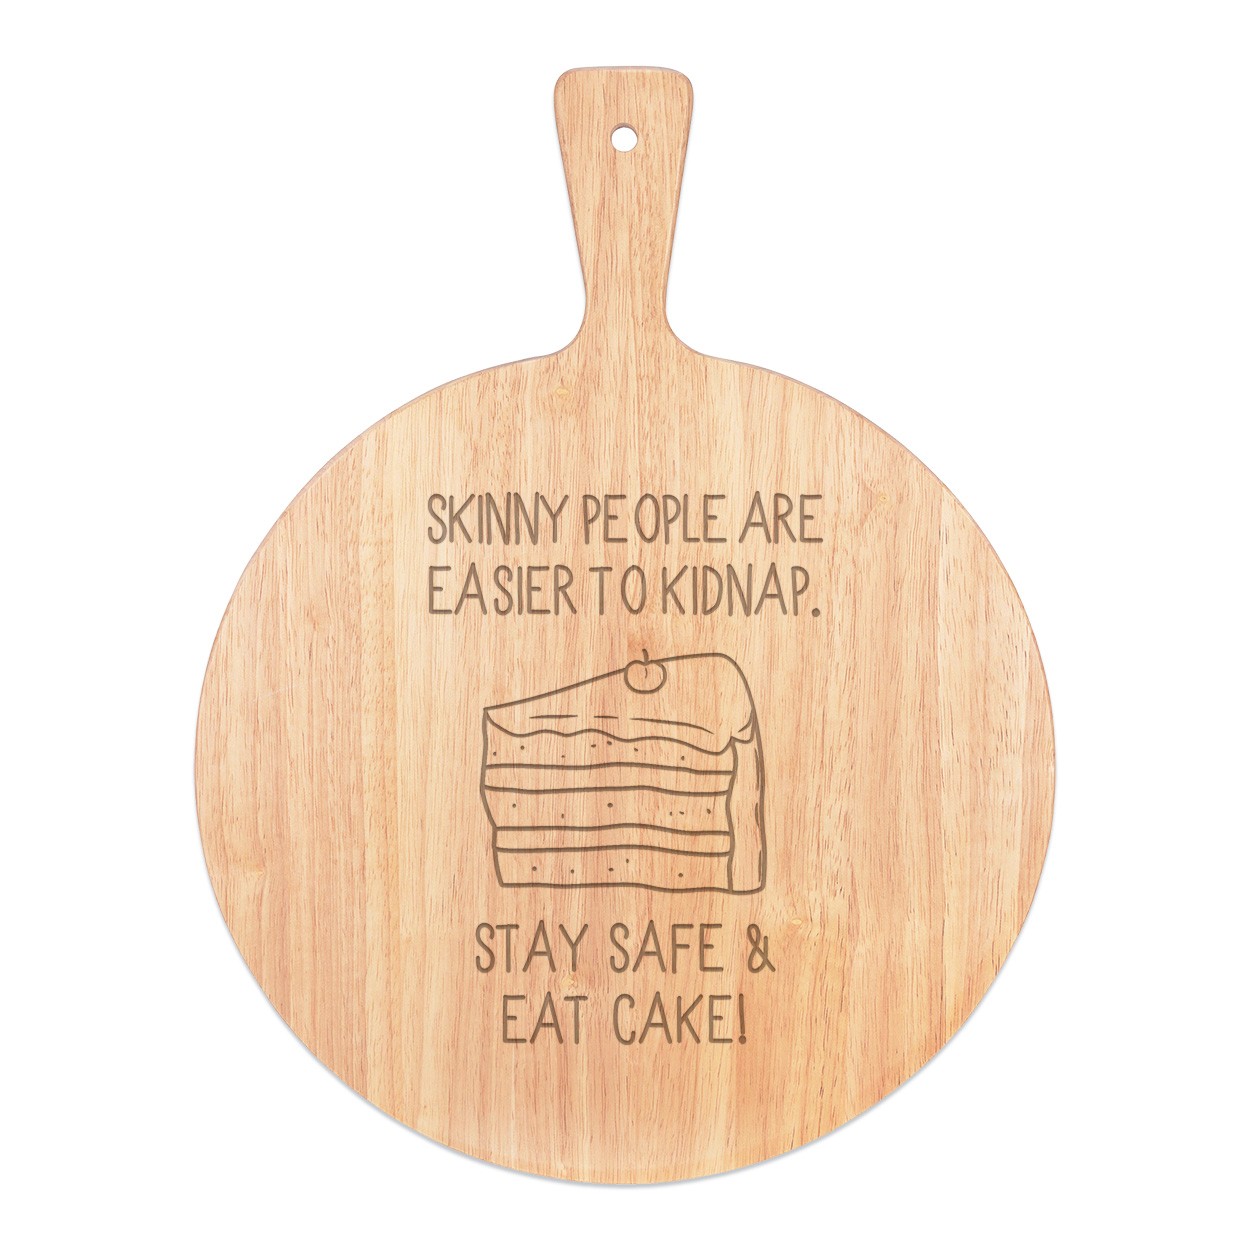 Skinny People Are Easier To Kidnap Stay Safe & Eat Cake Pizza Board Paddle Serving Tray Handle Round Wooden 45x34cm